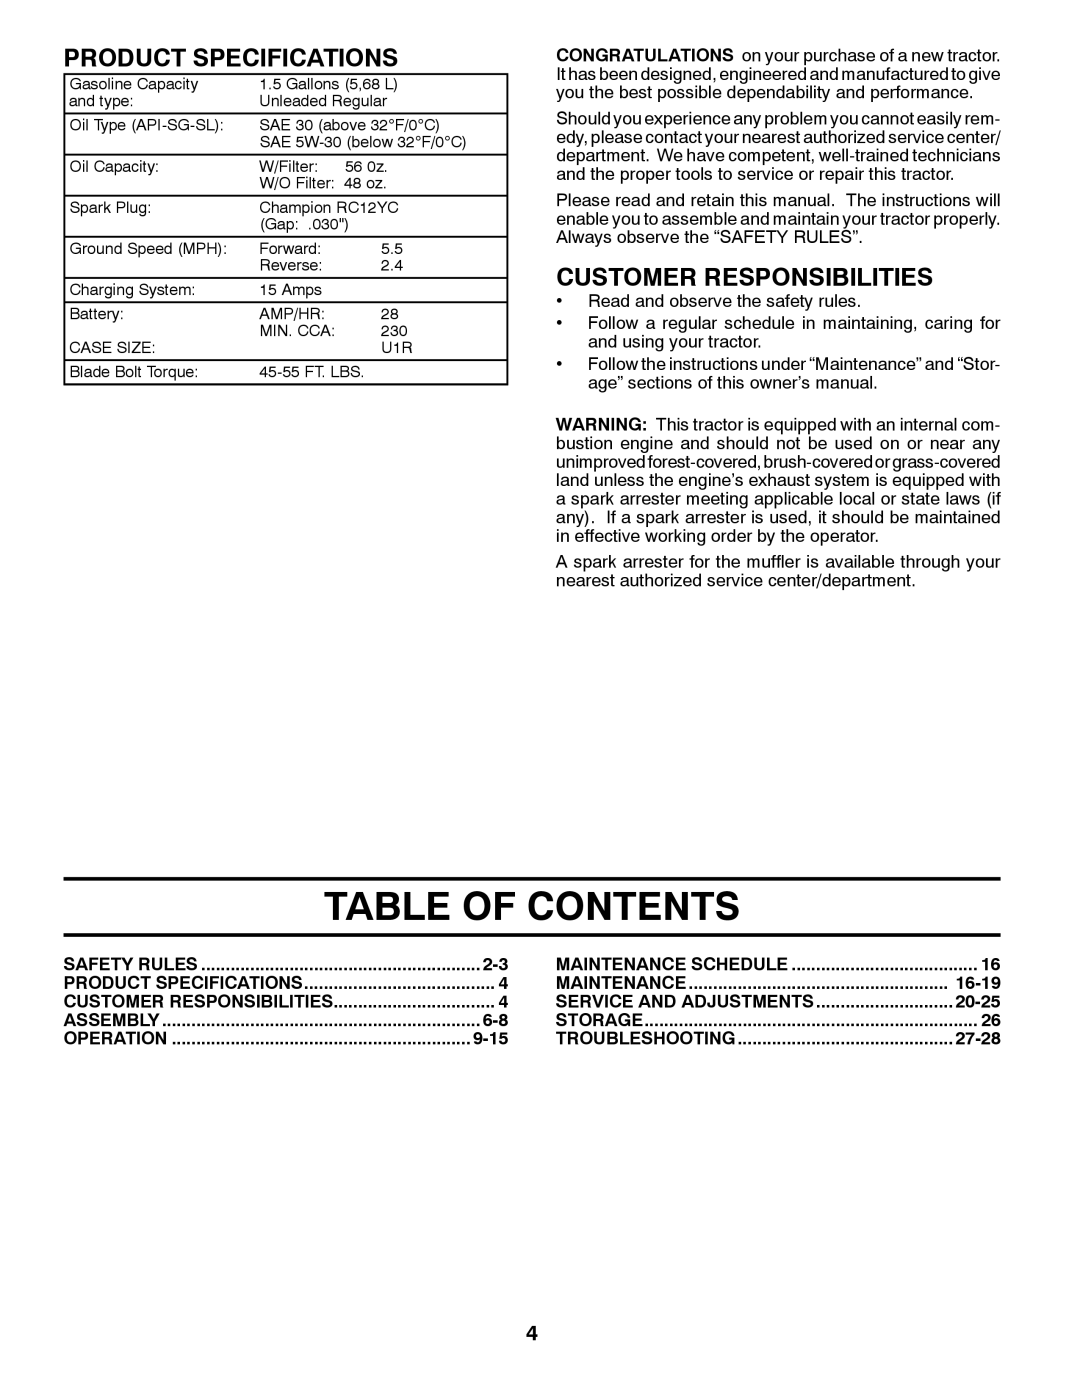 Jonsered LT2218A manual Table Of Contents, Product Specifications, Customer Responsibilities 